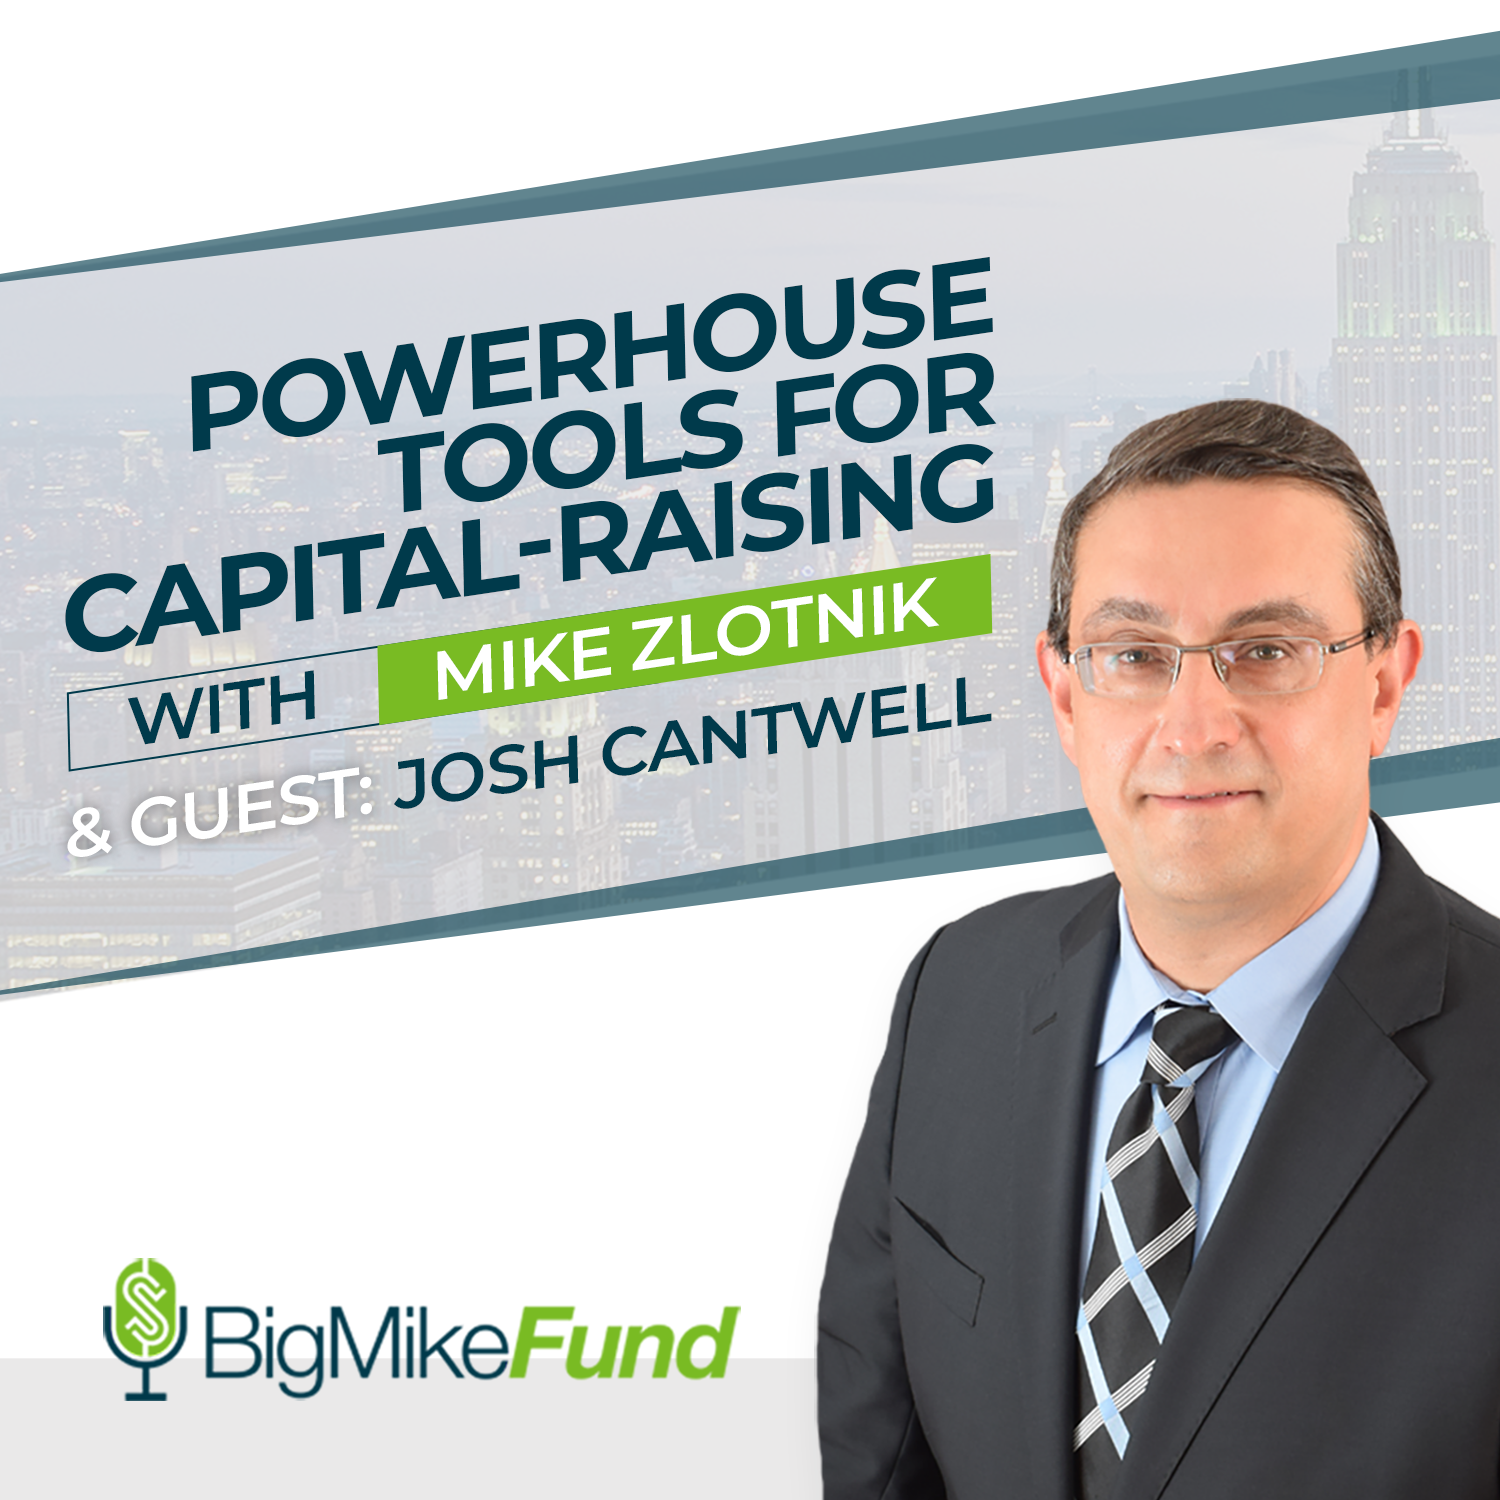 098: Powerhouse Tools for Capital-Raising with Josh Cantwell